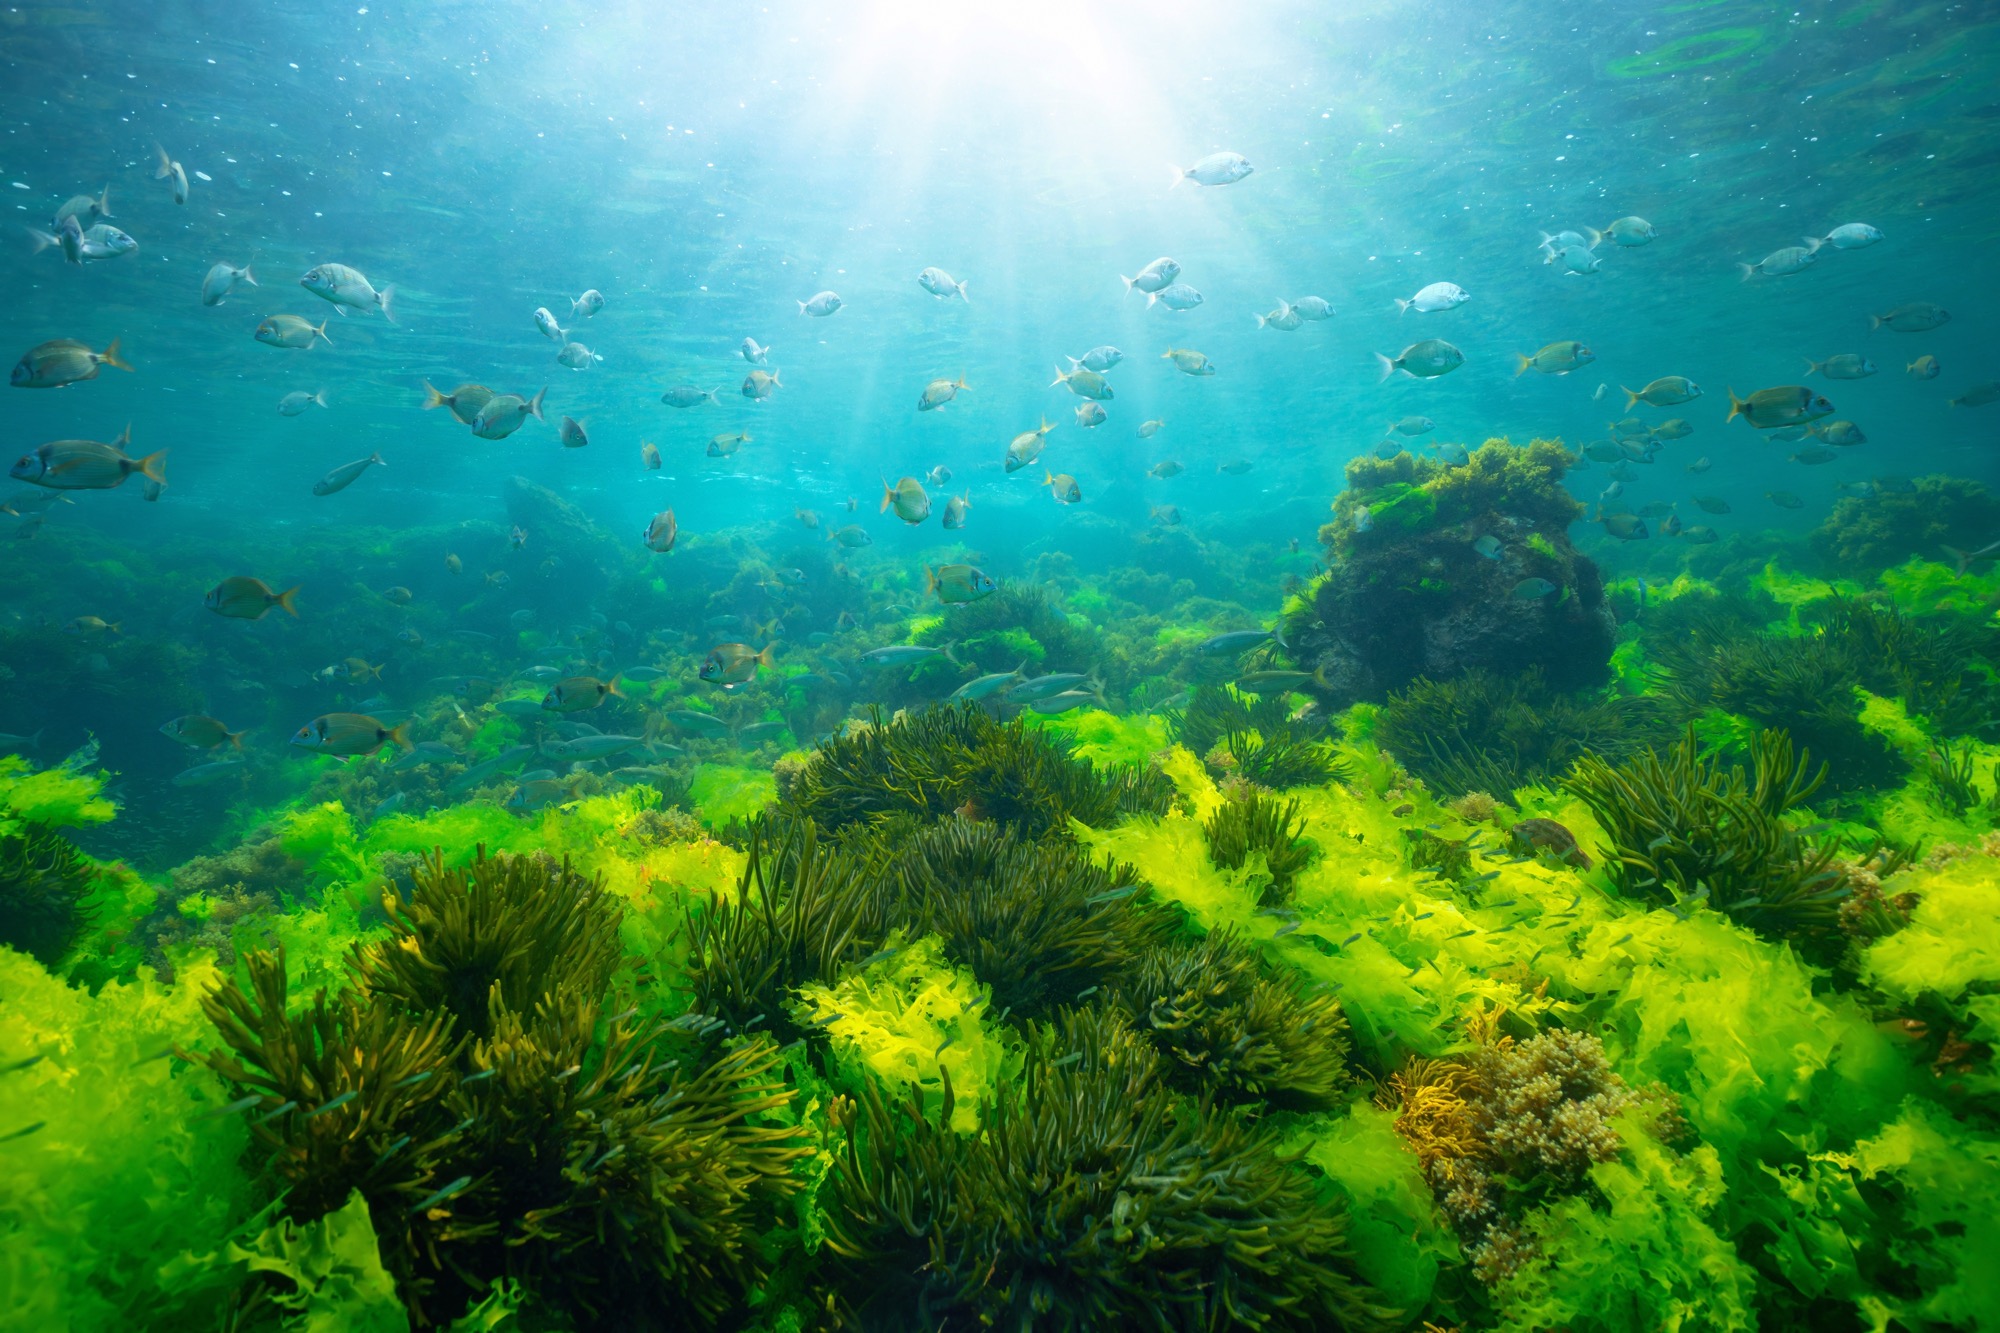 A sunny underwater seaweed landscape with fish swimming above several different species of green seaweed such as sea lettuce